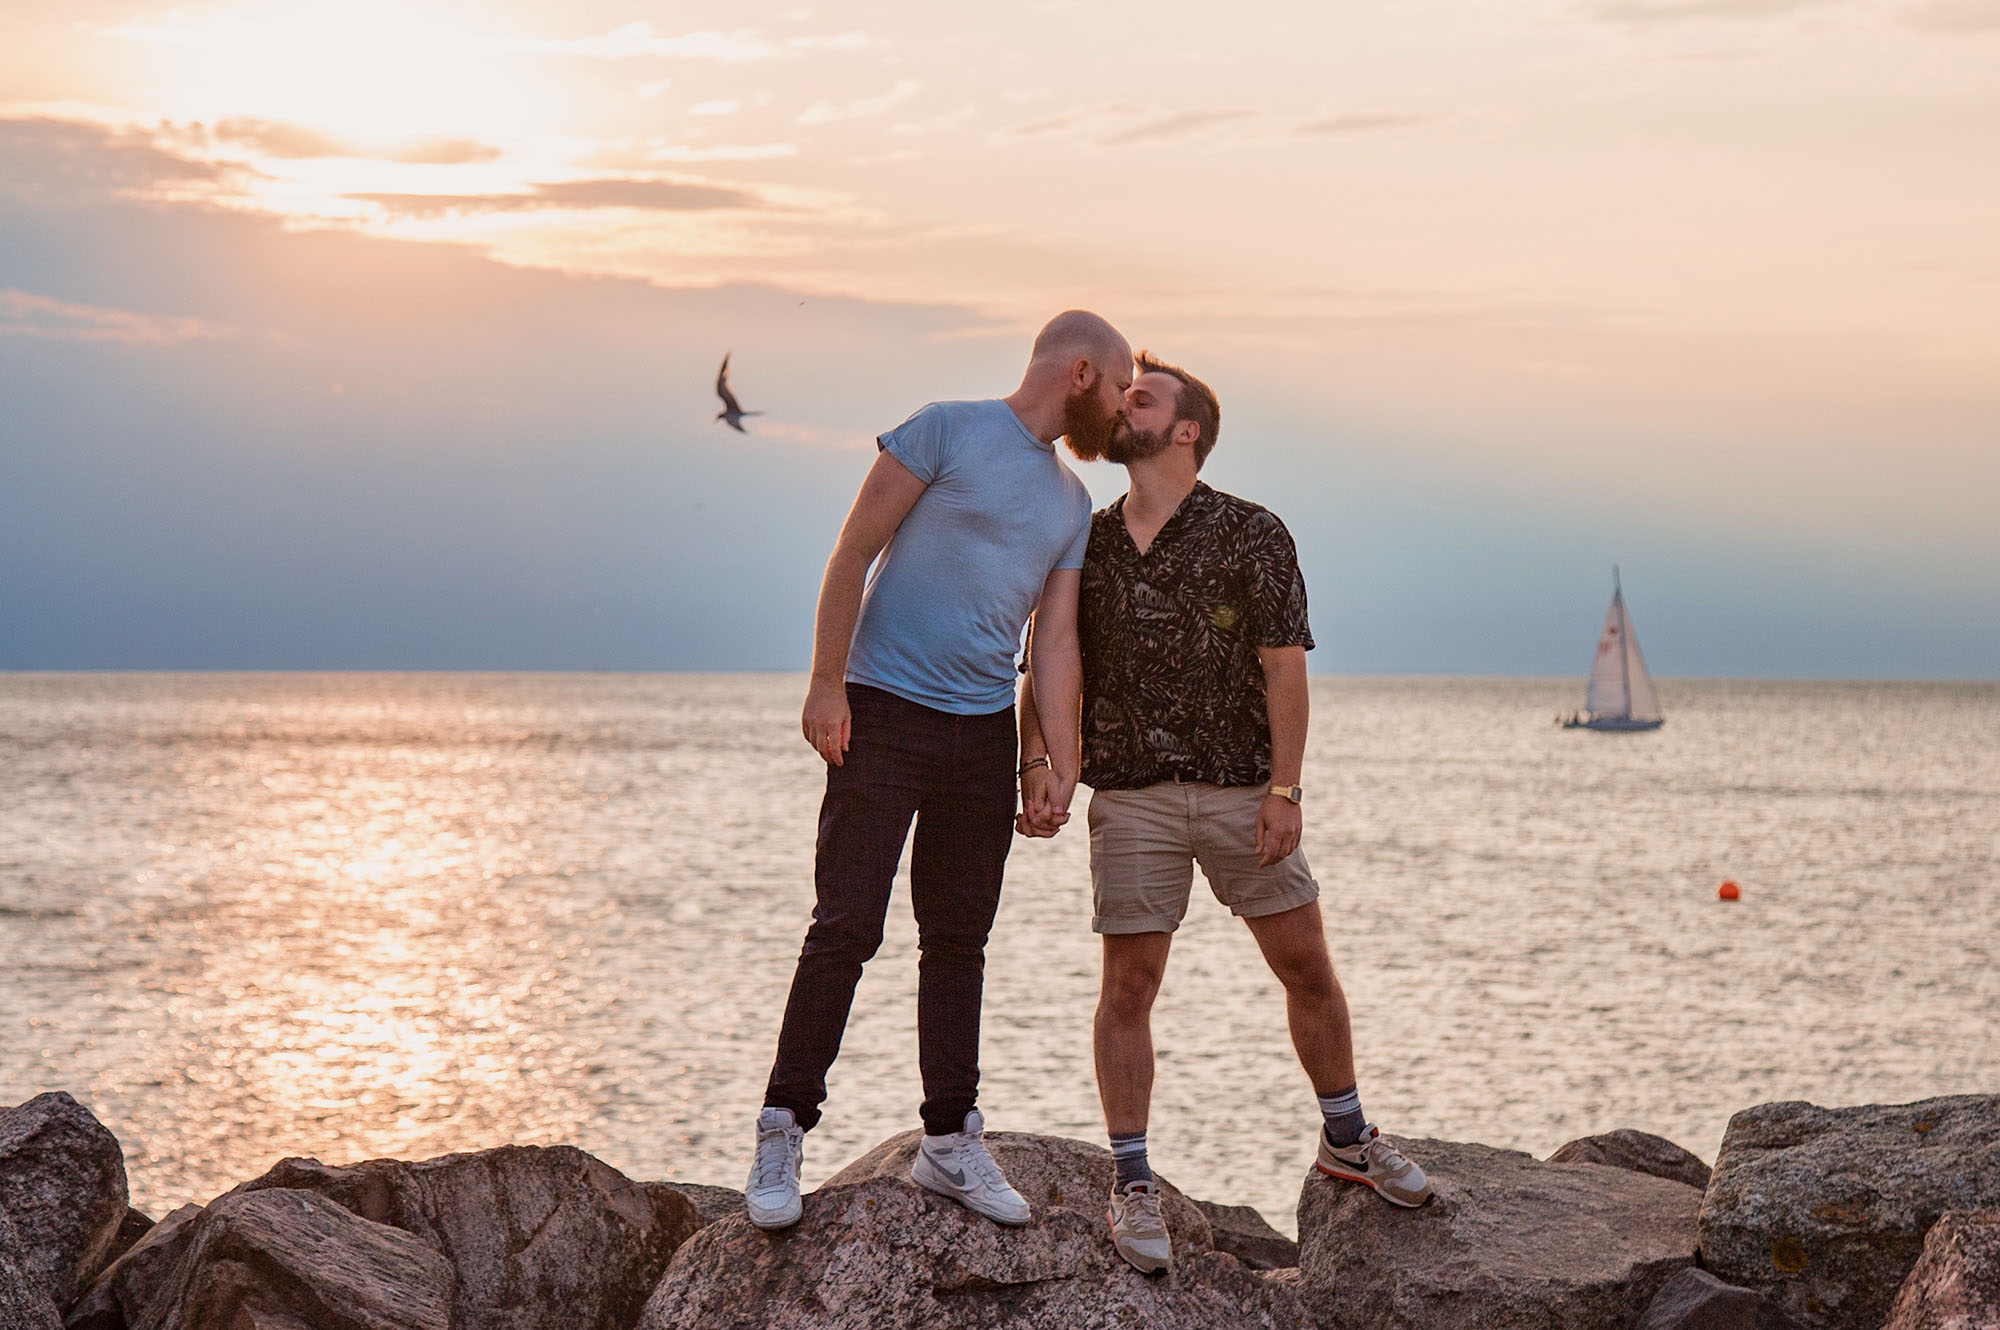 We will travel again: LGBT Couples Need Support